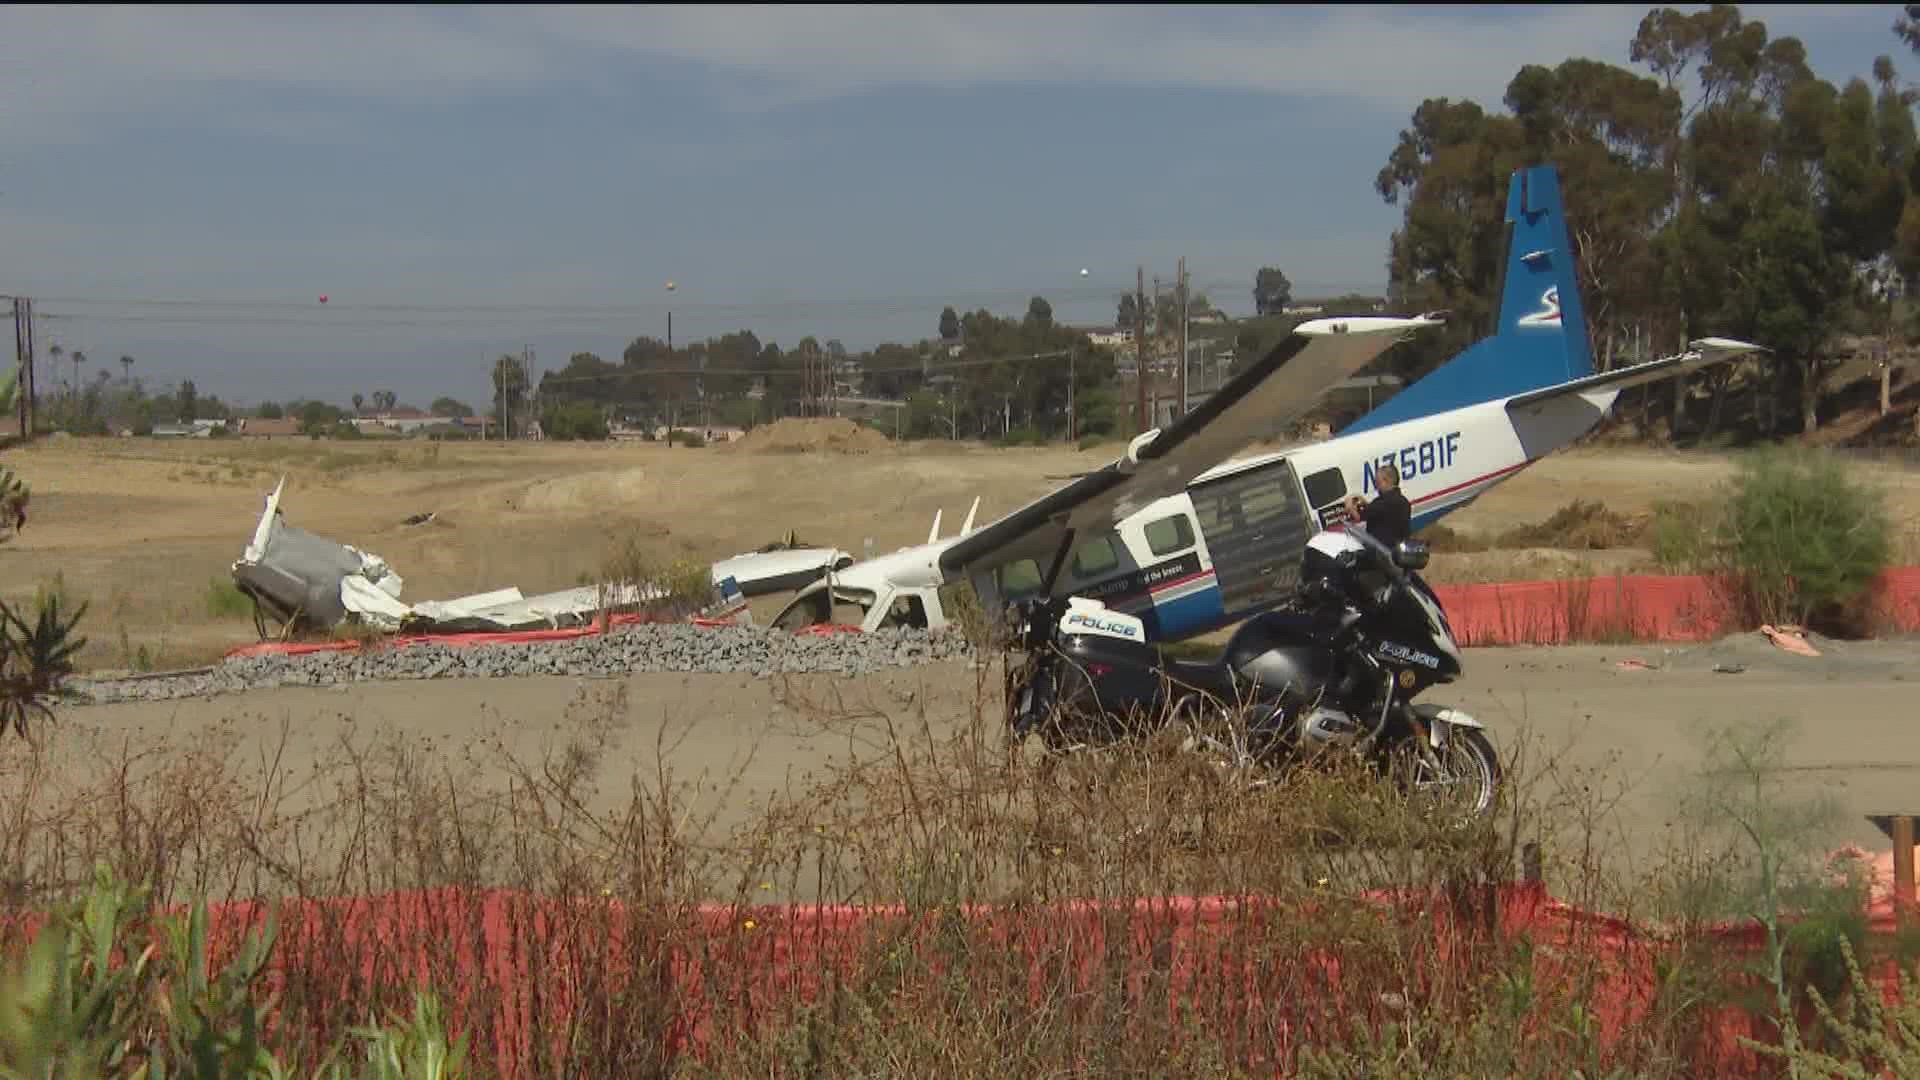 Two people were aboard a plane at the time of the crash. This is the second crash involving a GoJump plane this year.